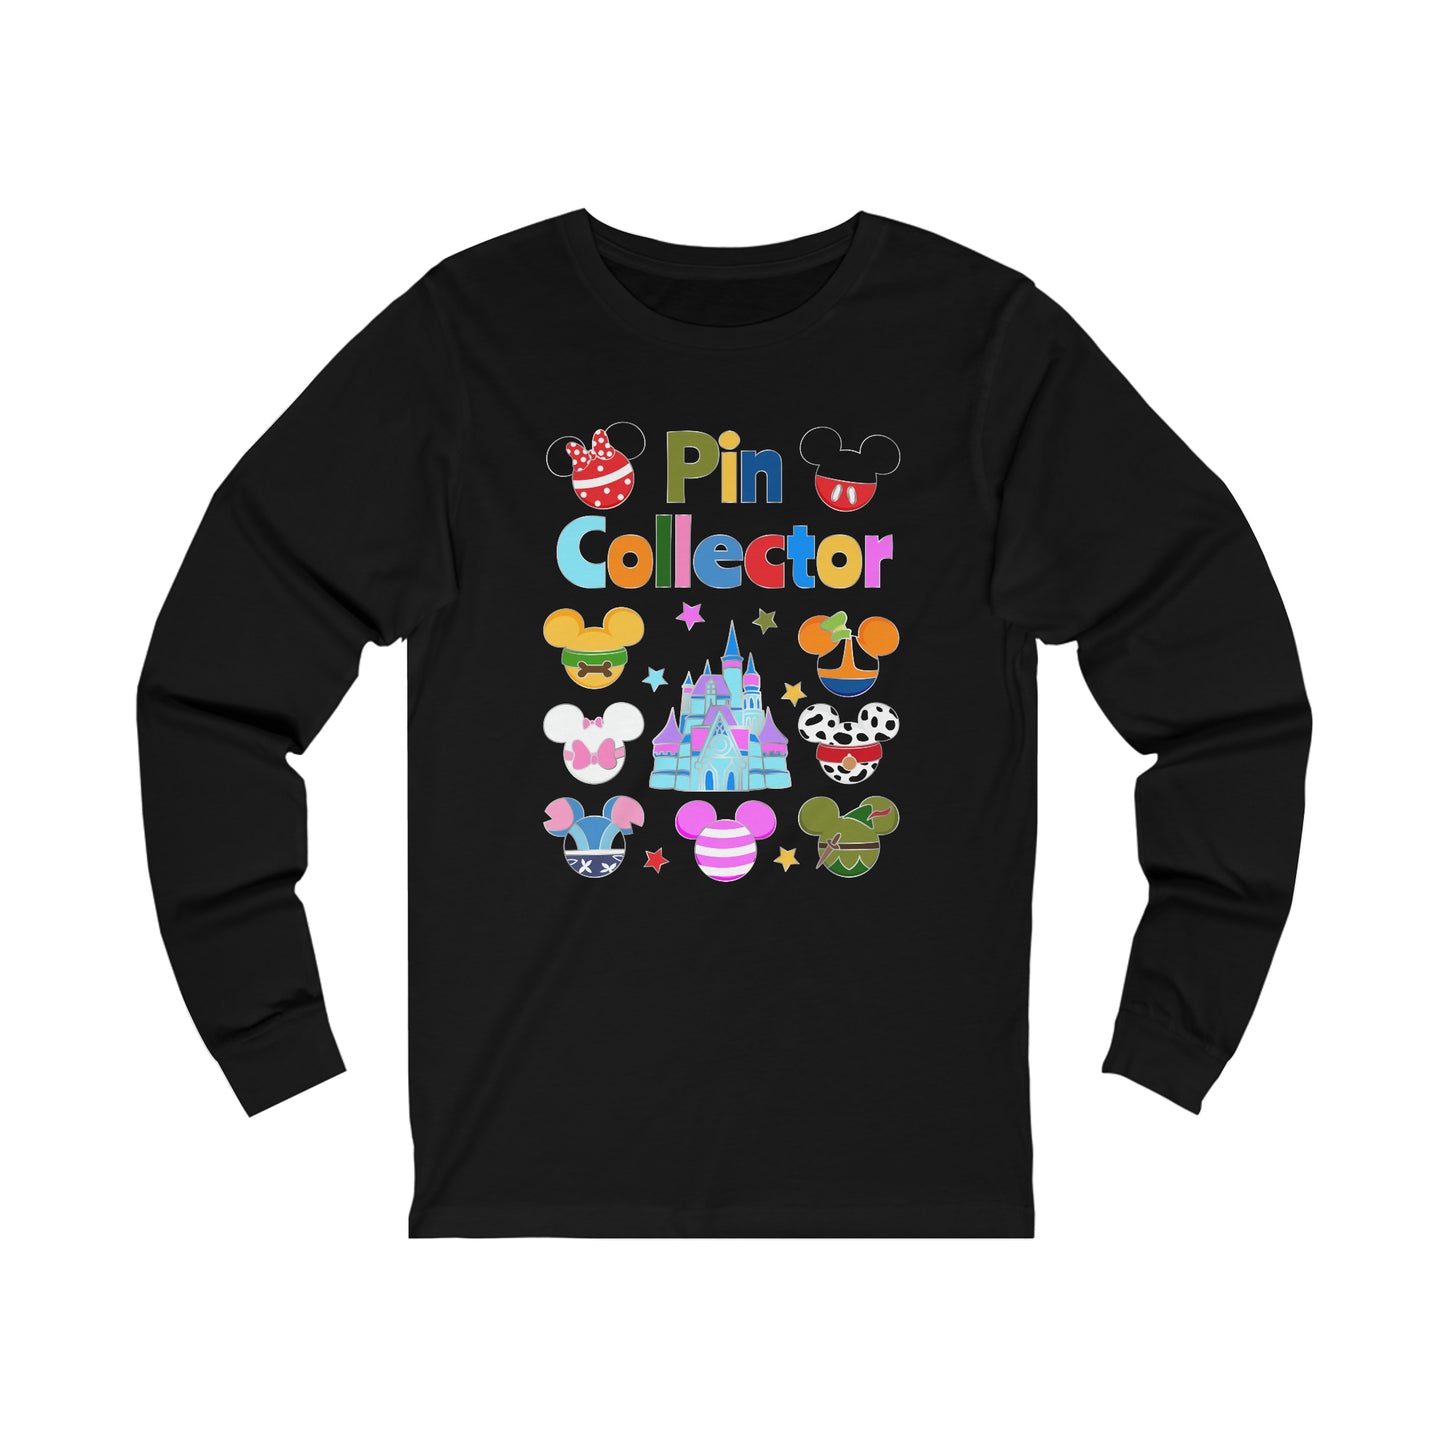 Pin Collector Unisex Long Sleeve Graphic Tee